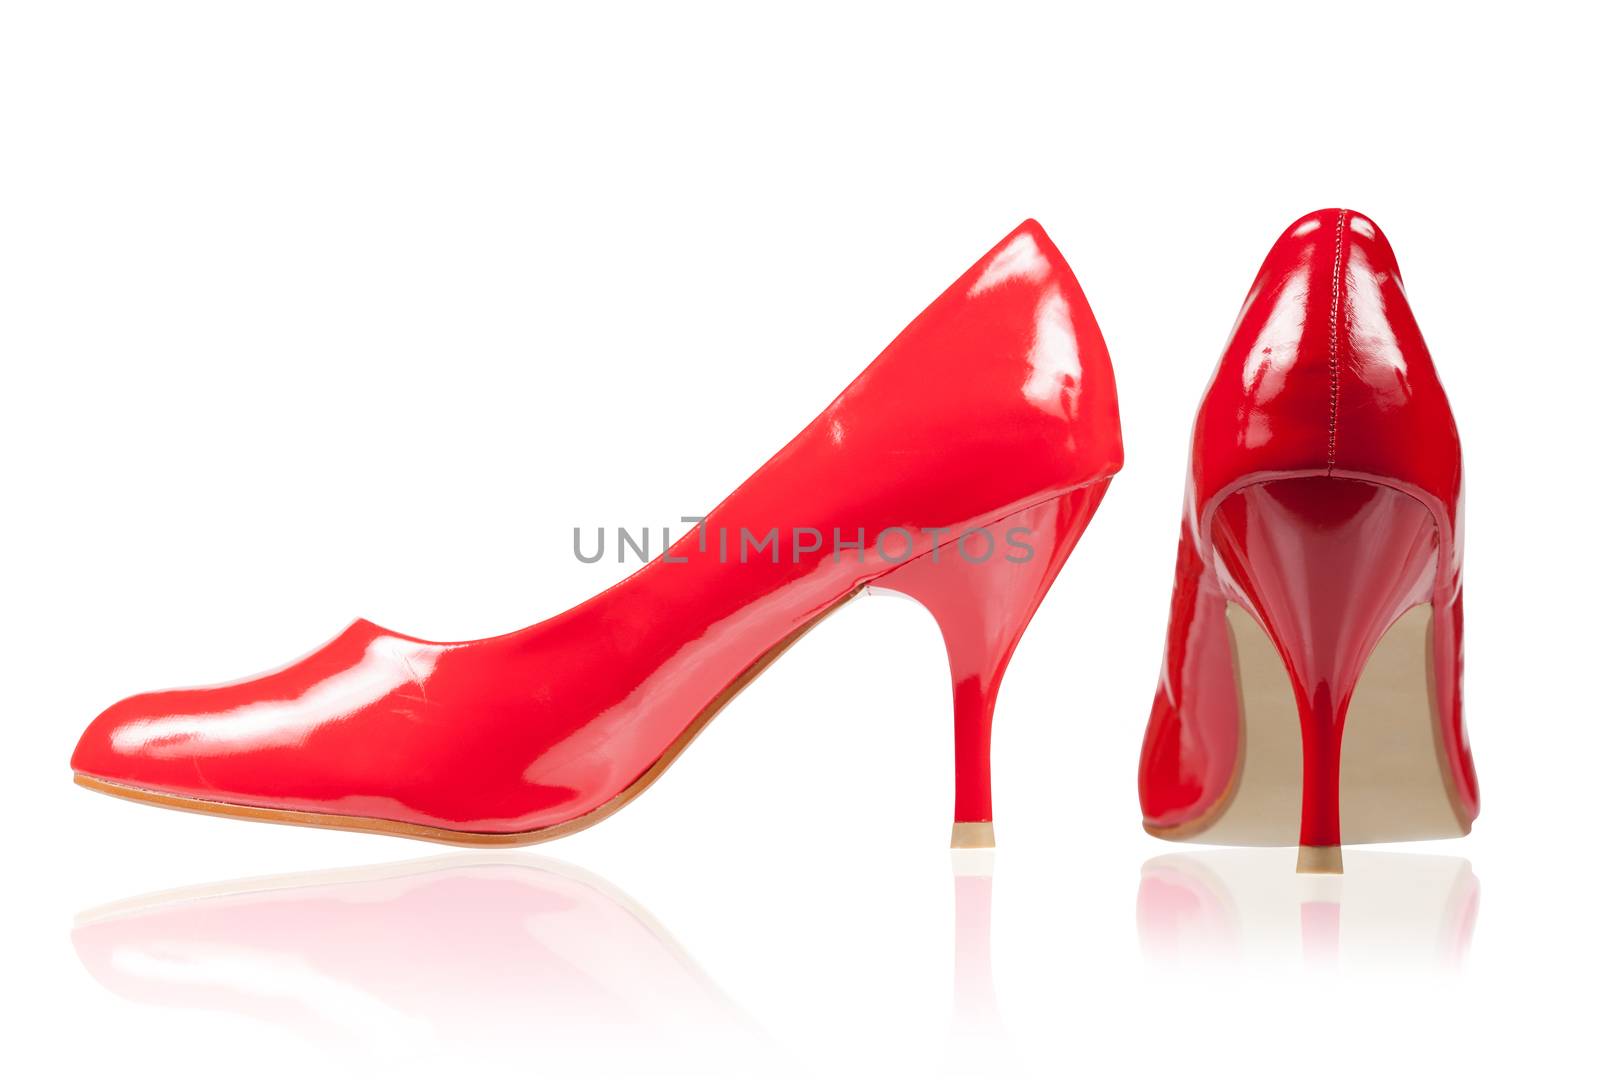 women's red shoes on a thin heel isolated on white. Collage. View side and rear